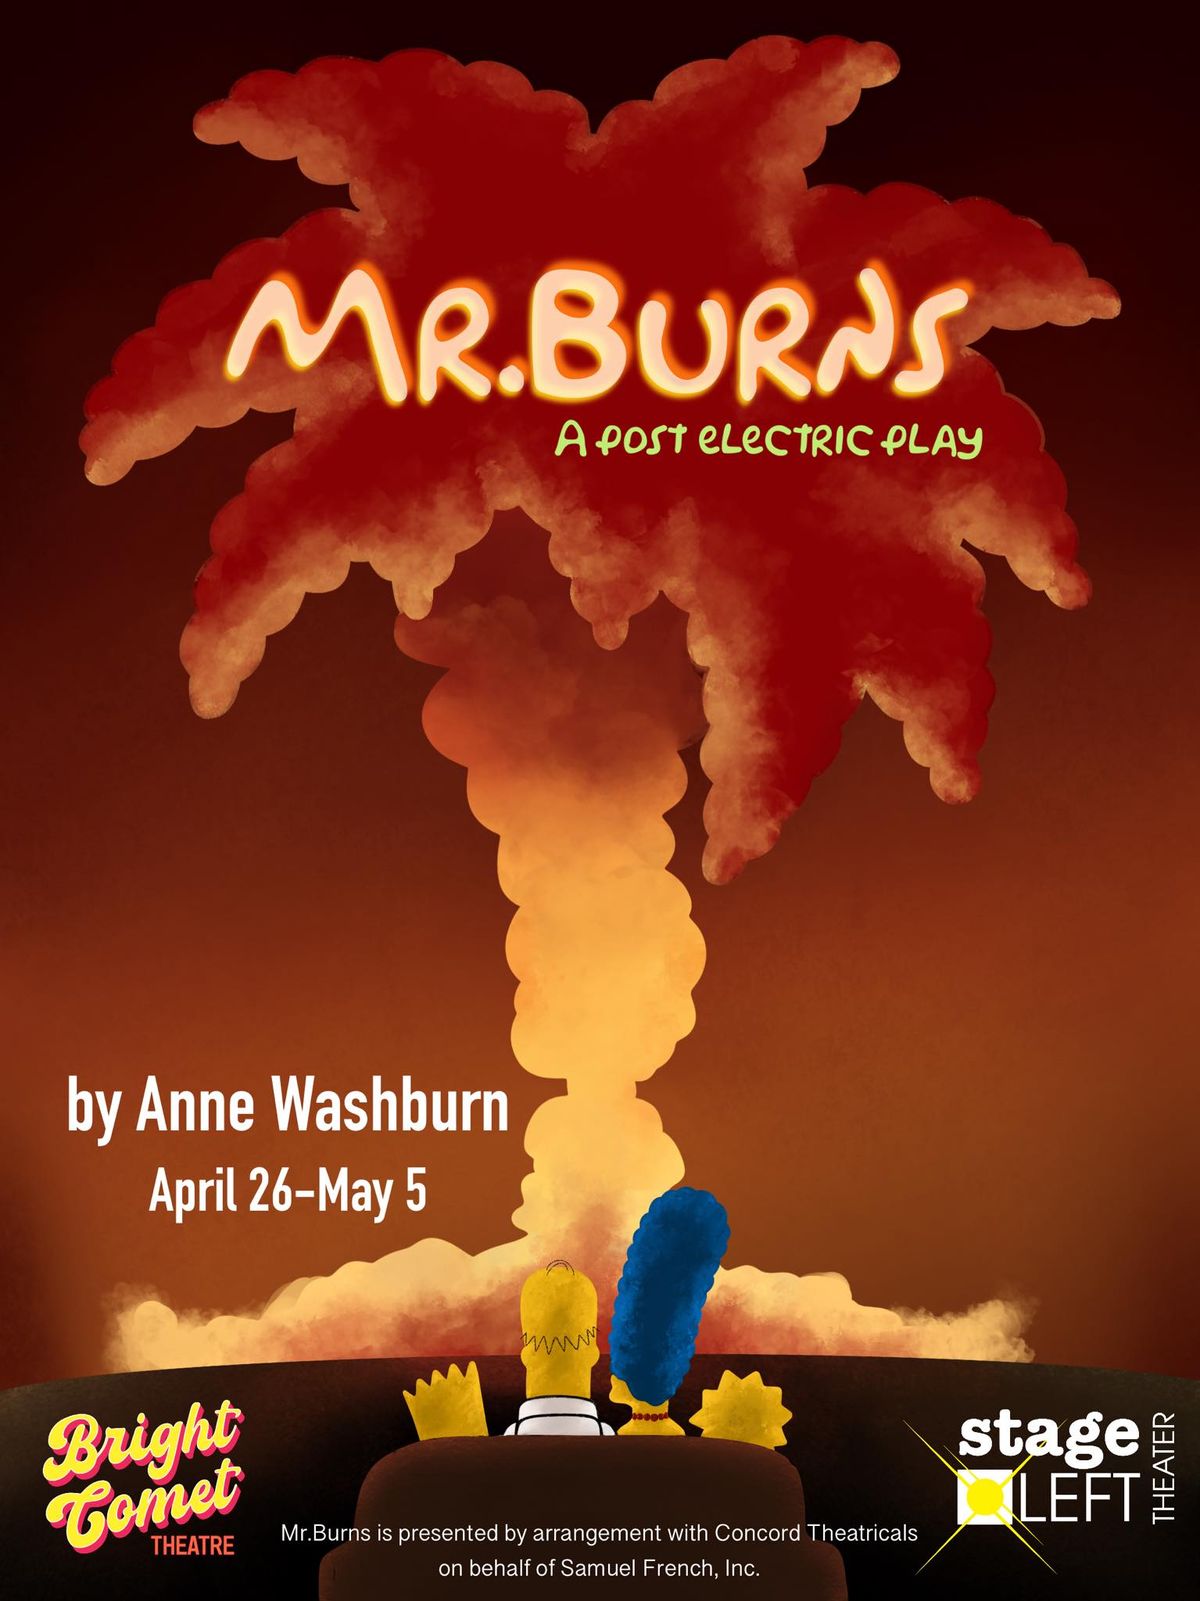 "Mr. Burns" will be performed April 26-May 5.  (Bright Comet Theatre)